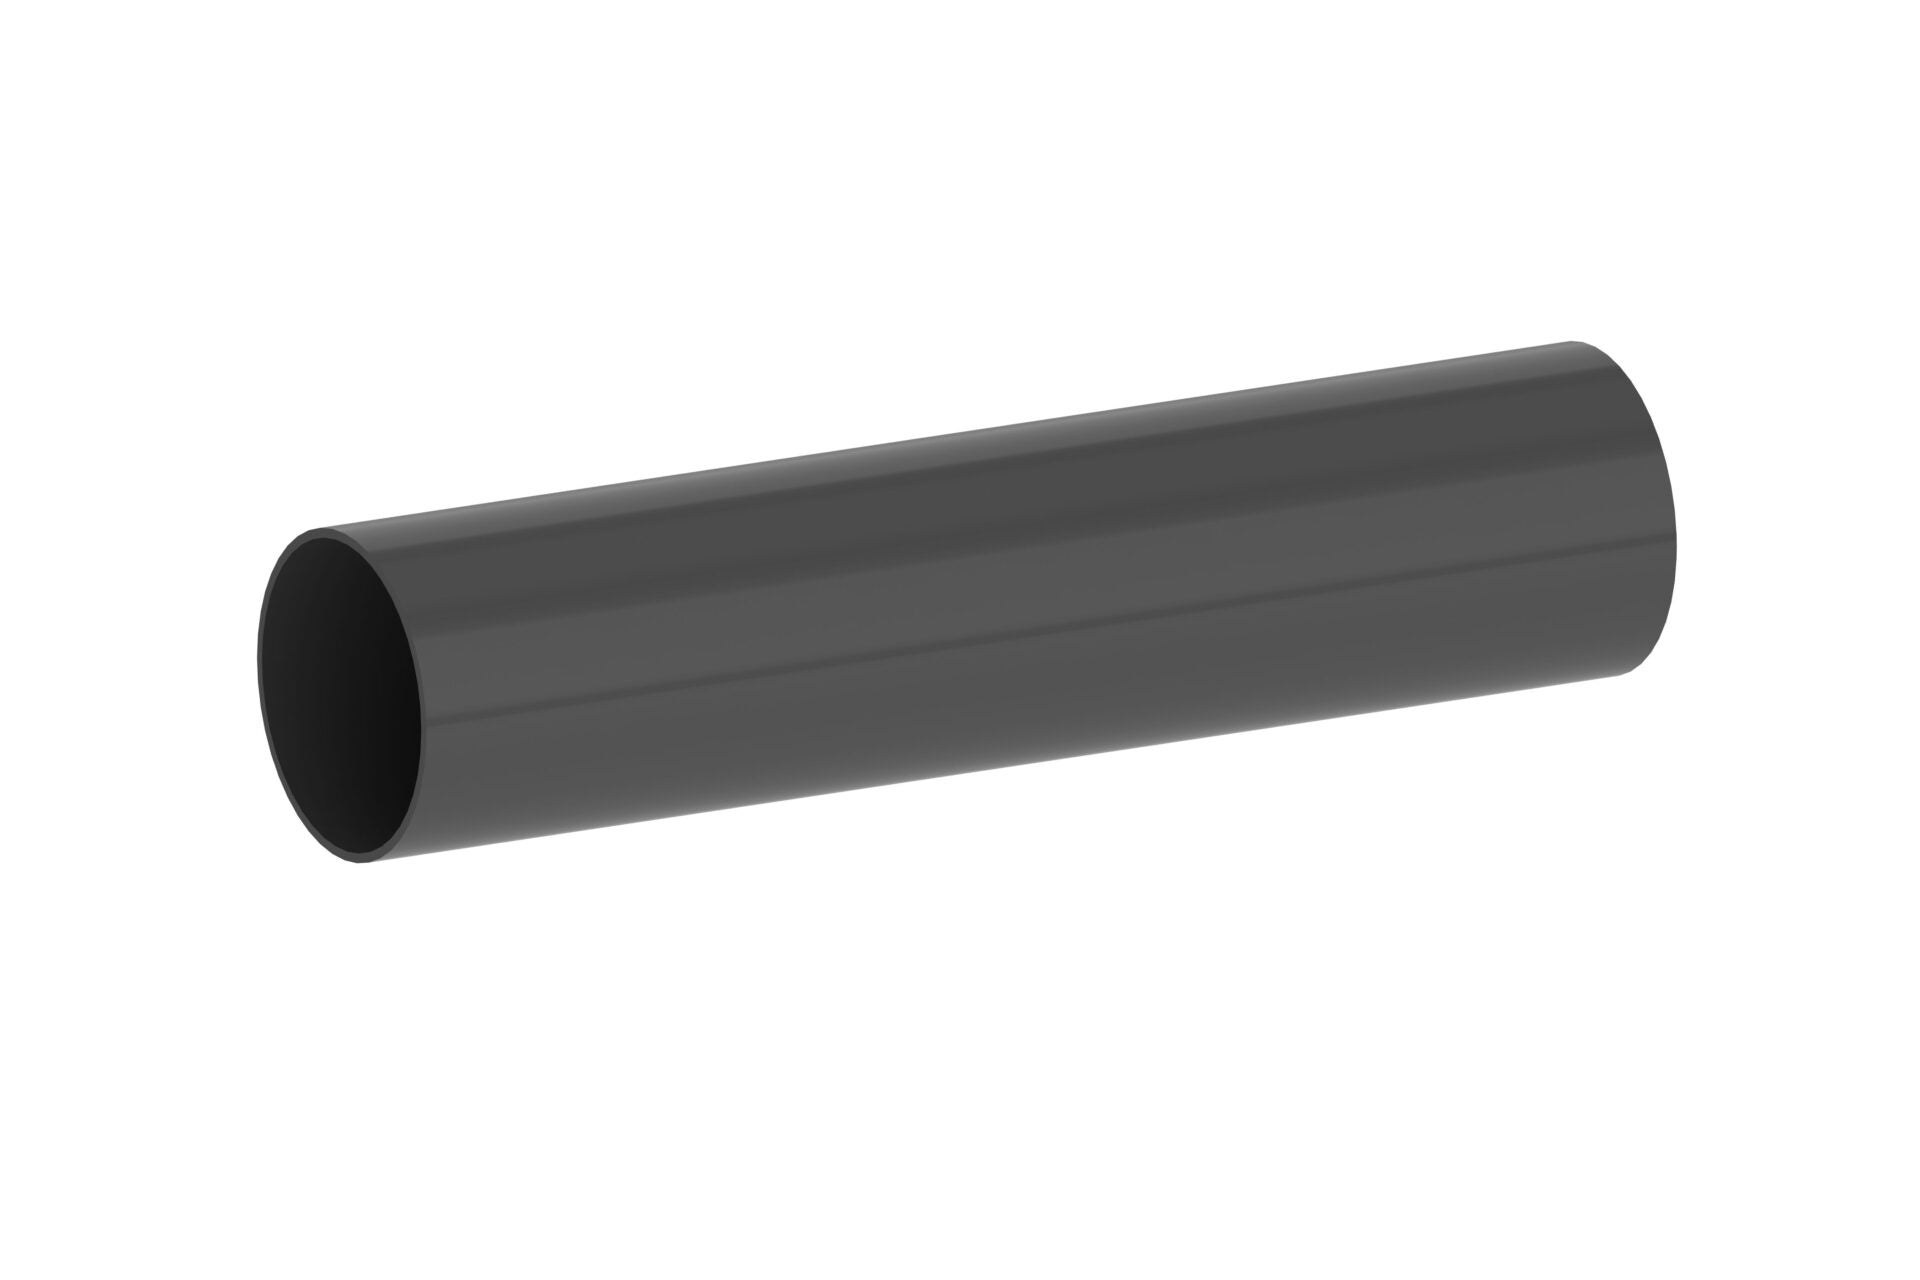 NEW! Replacement Loading Tube for B12MG Gun